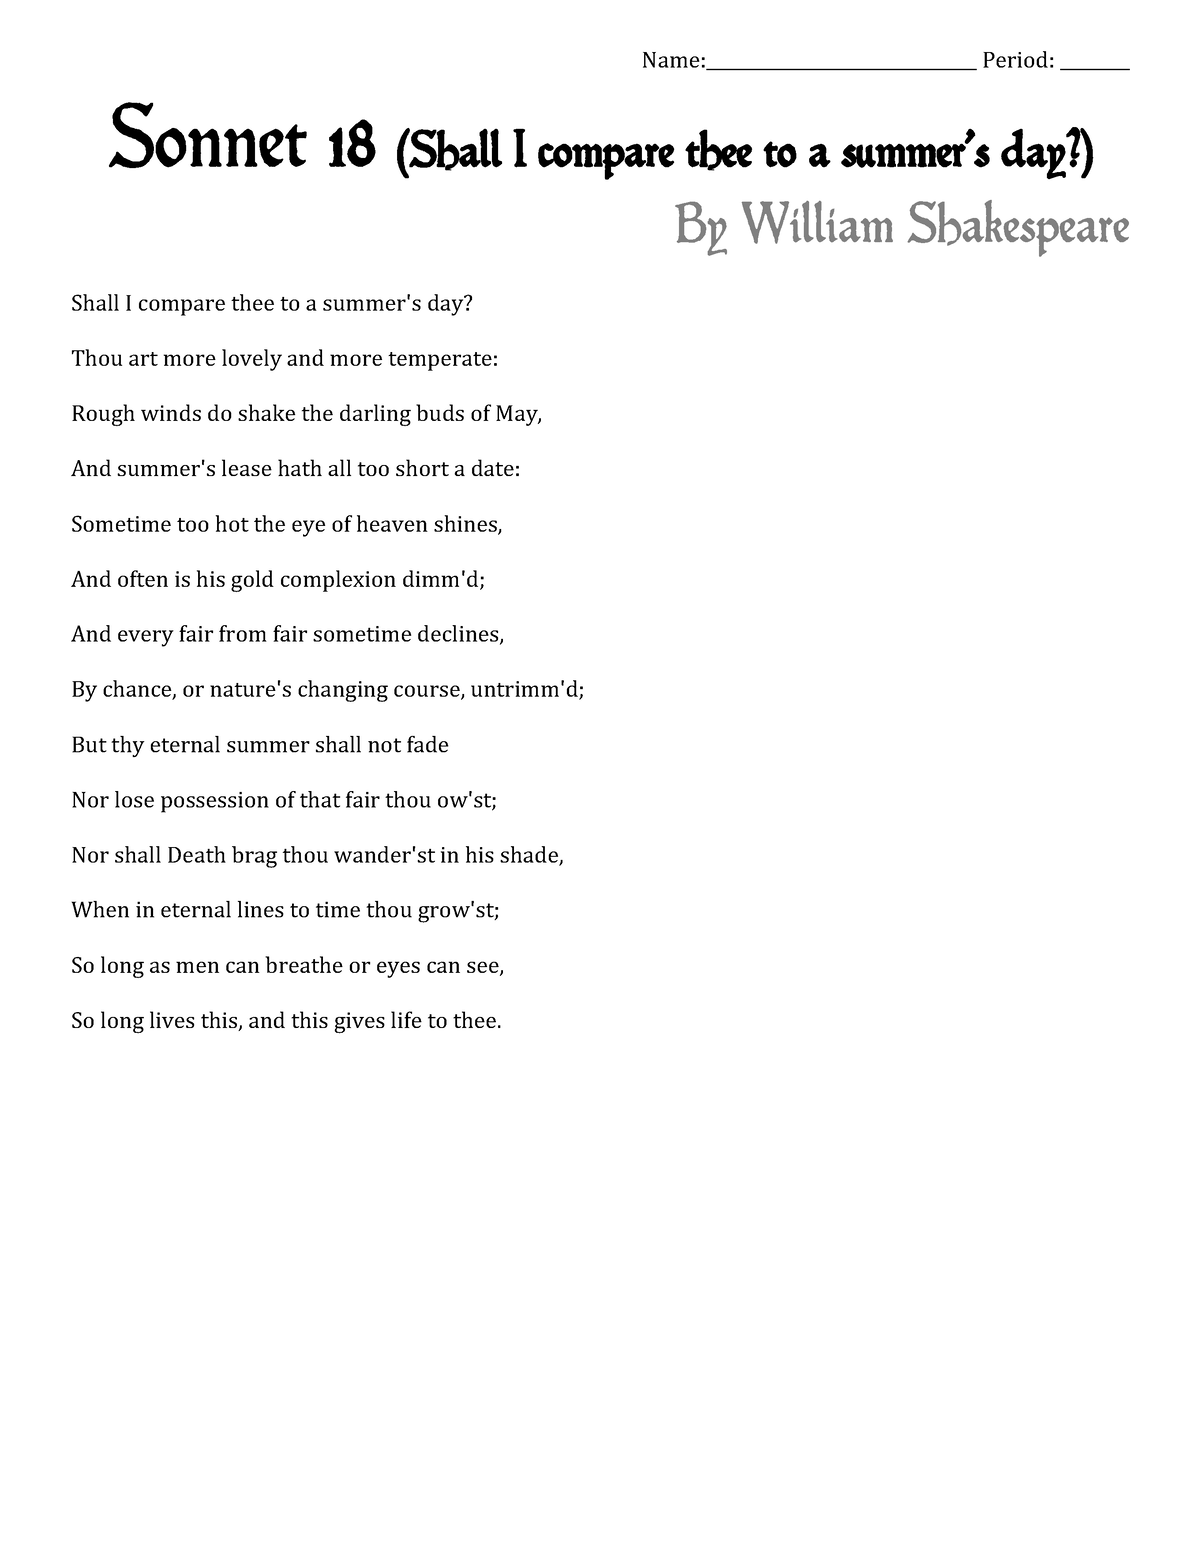 Sonnet 18 Name Period Sonnet 18 Shall I Compare 